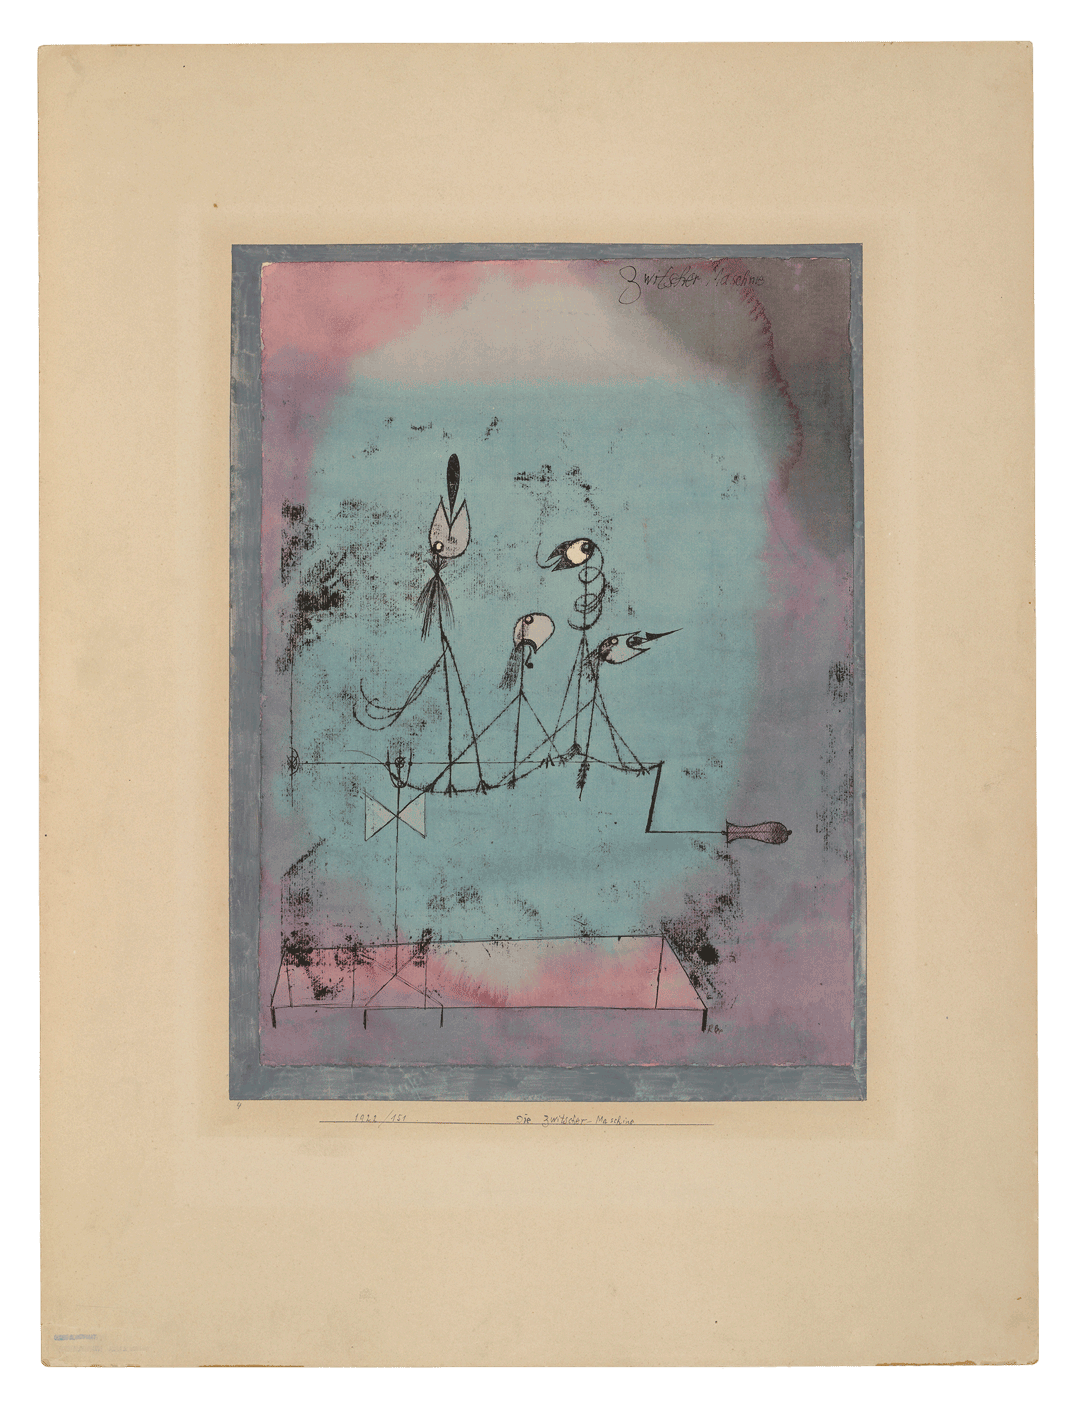 A mixed media work by Paul Klee, titled Twittering Machine (Die Zwitzcher-Maschine), dated 1922.